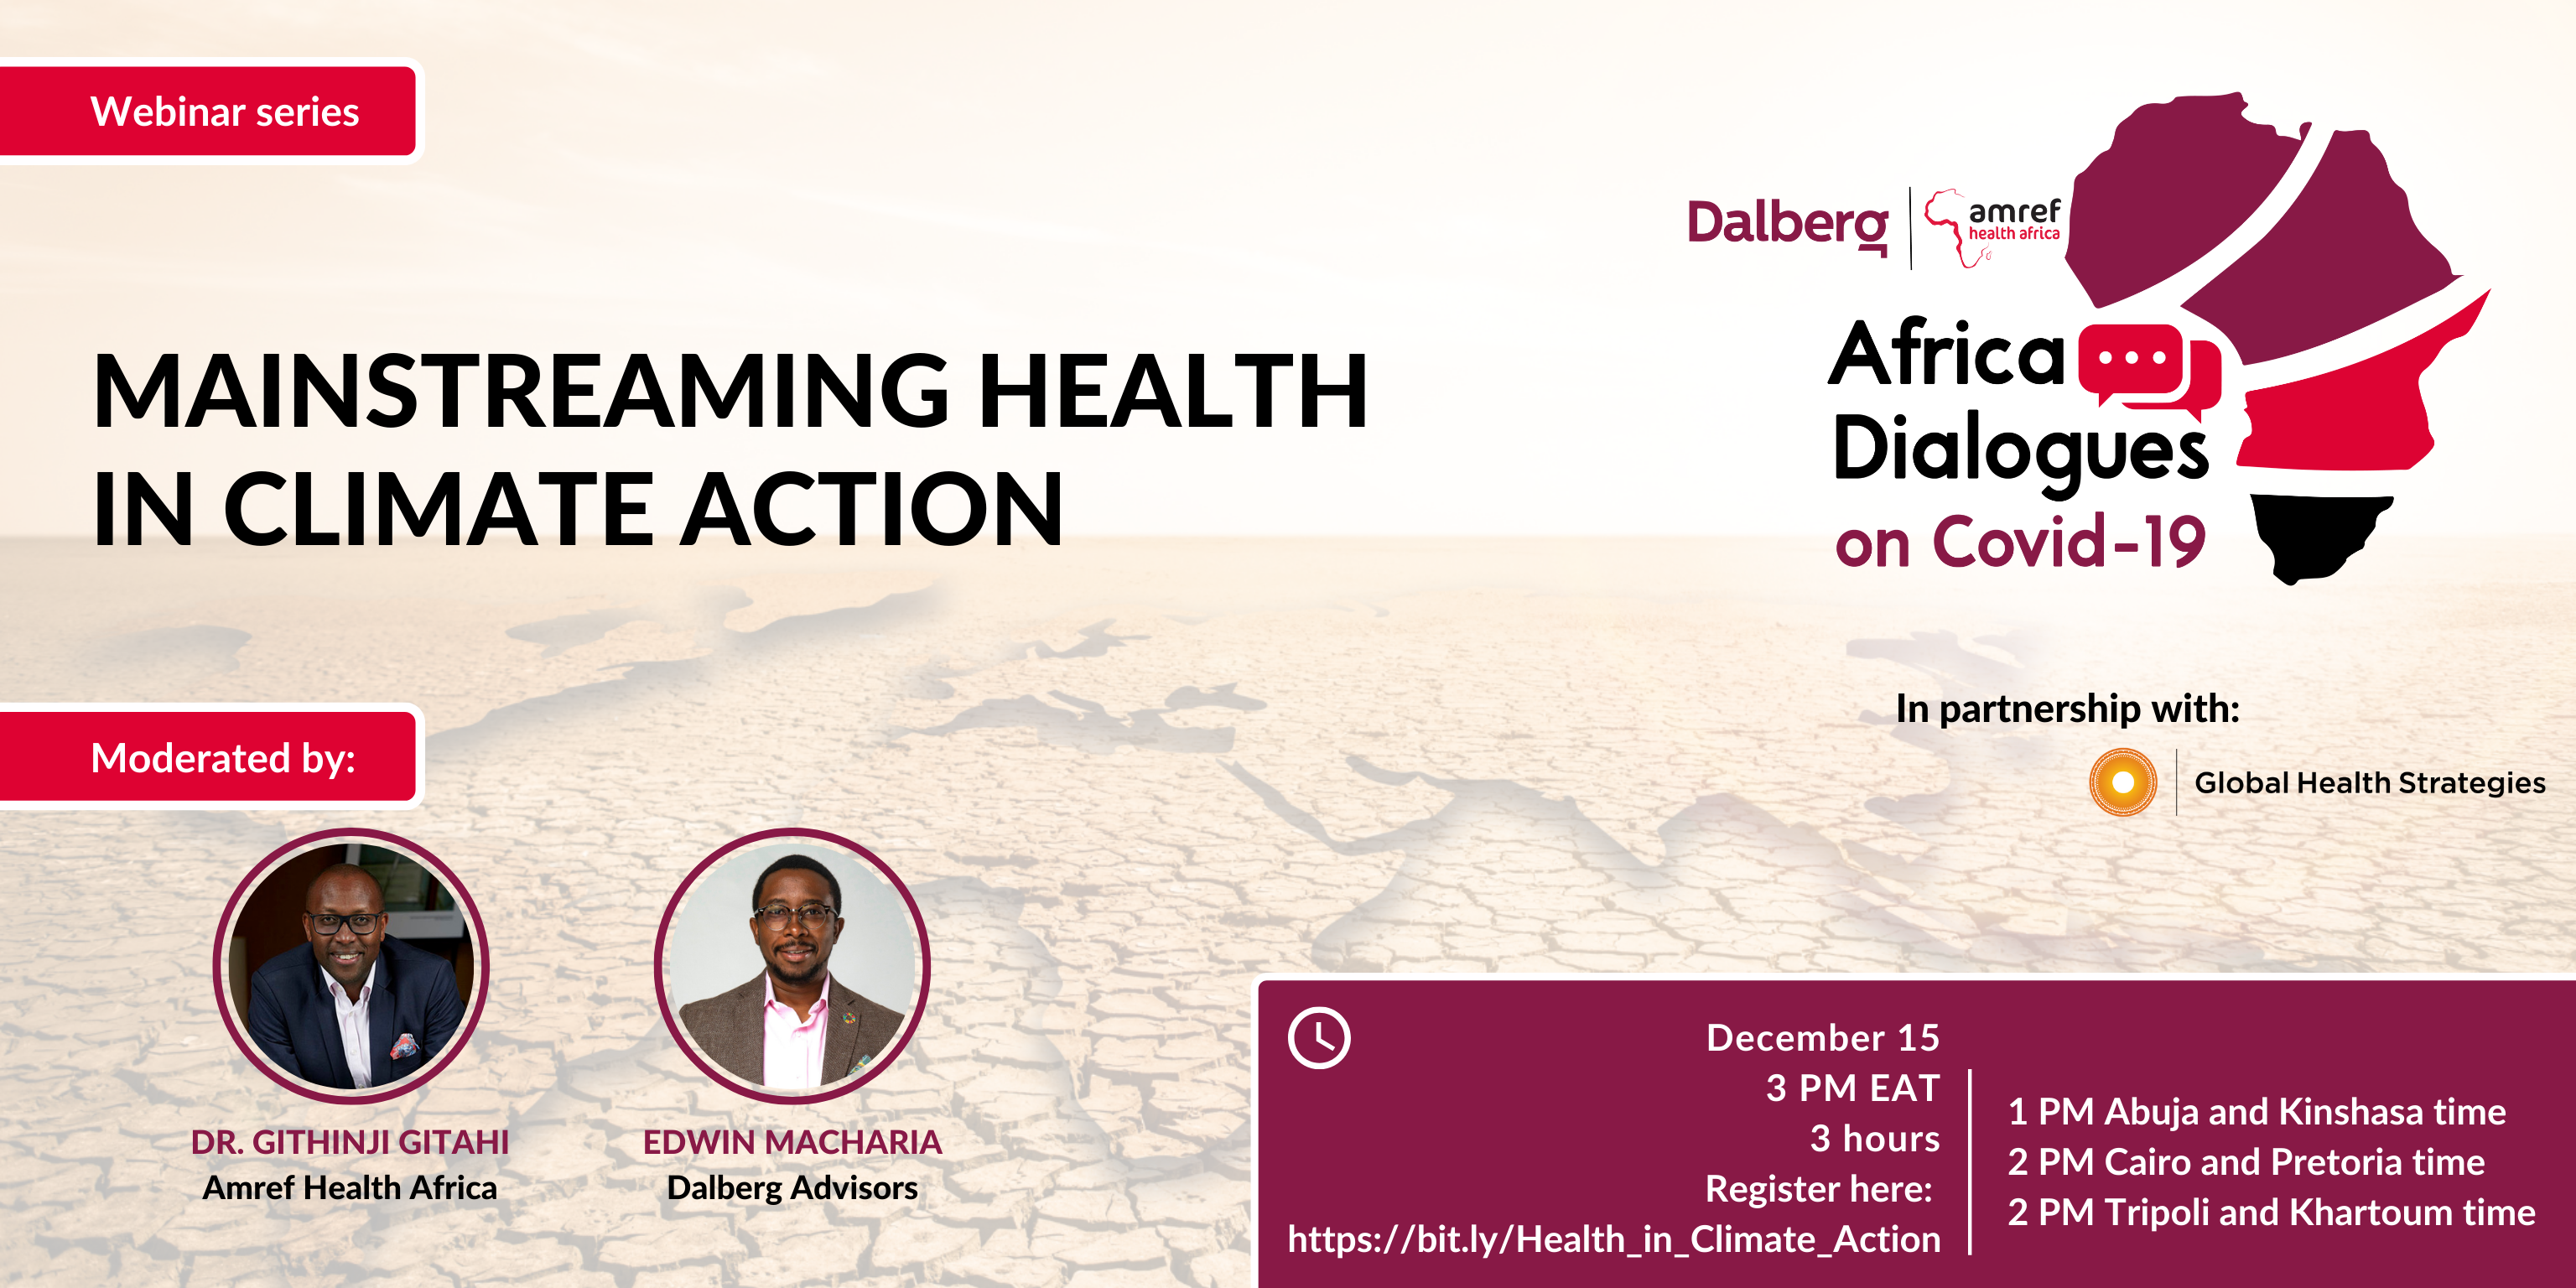 Promo for the webinar series "Mainstreaming Health in Climate Action." The event will be December 15 at 3 PM East Africa Time (EAT)